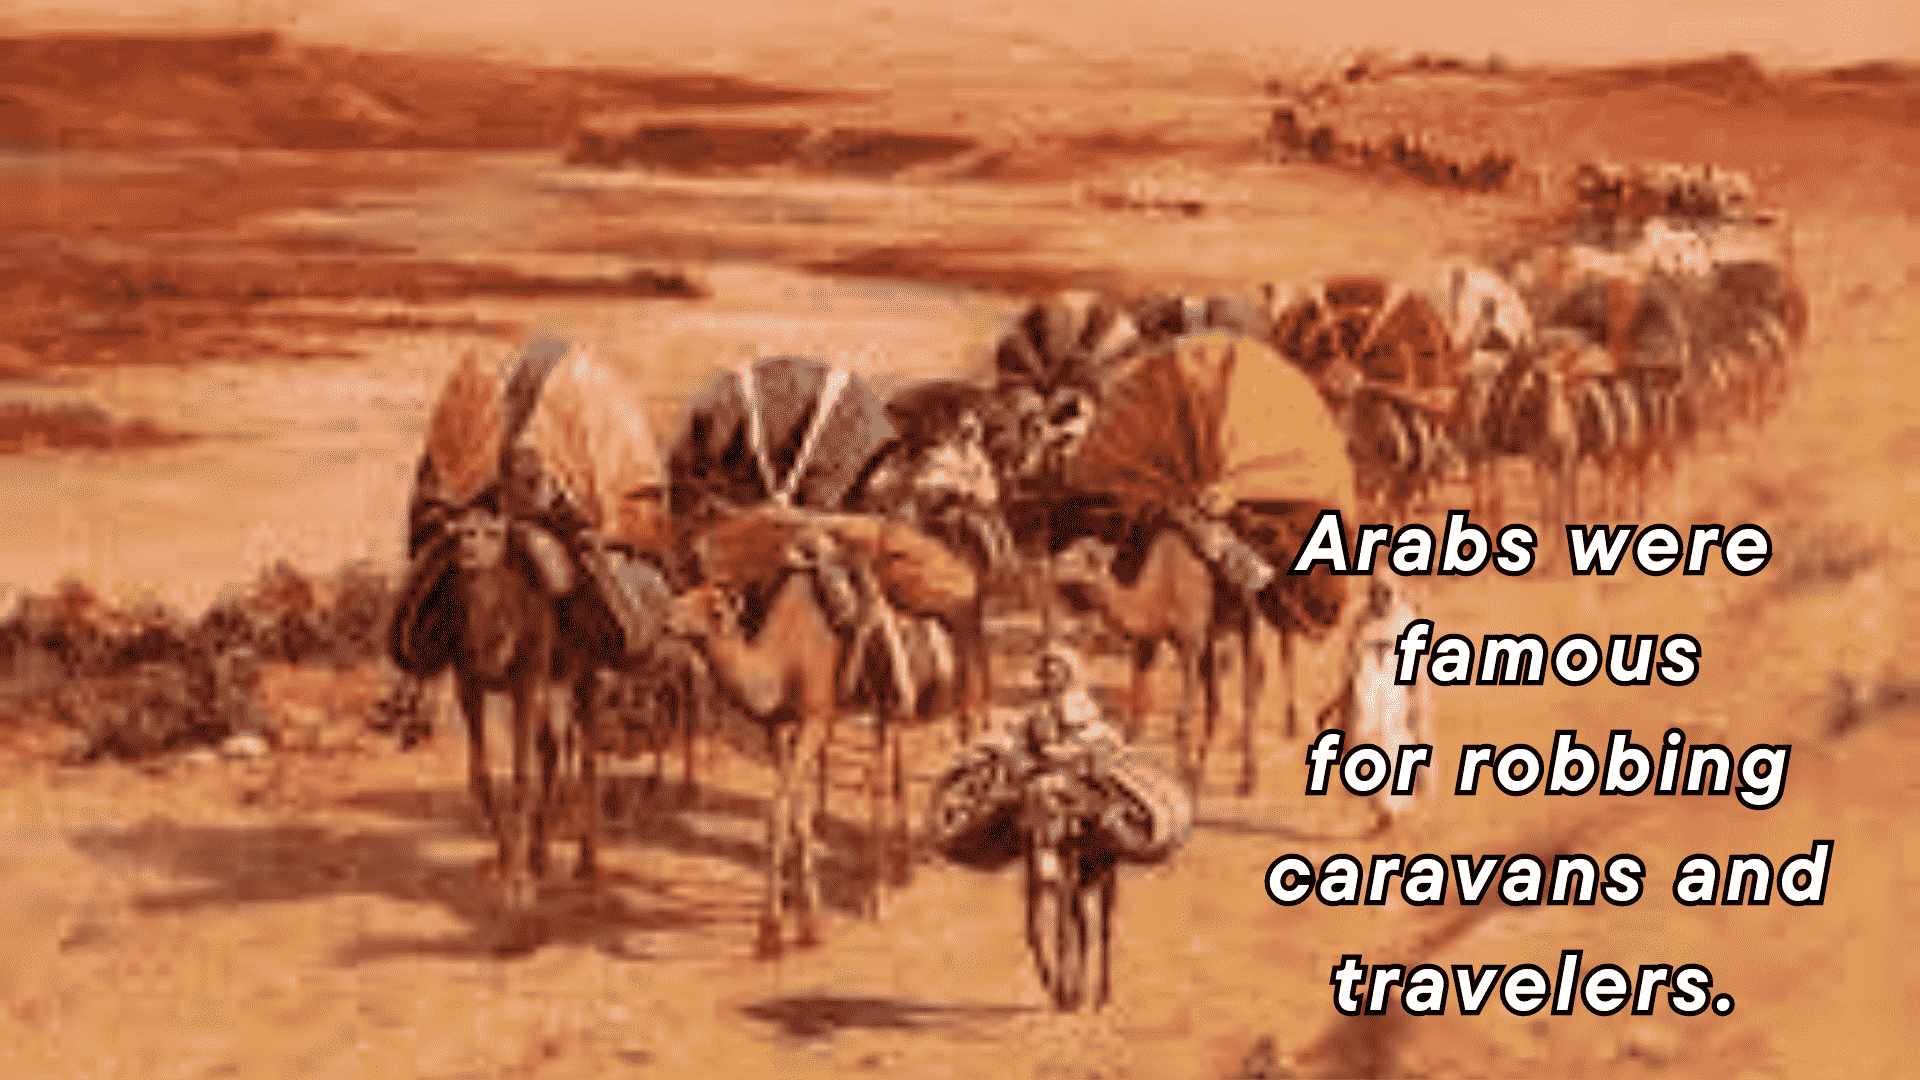 Arabs were famous for robbing caravans and travelers.